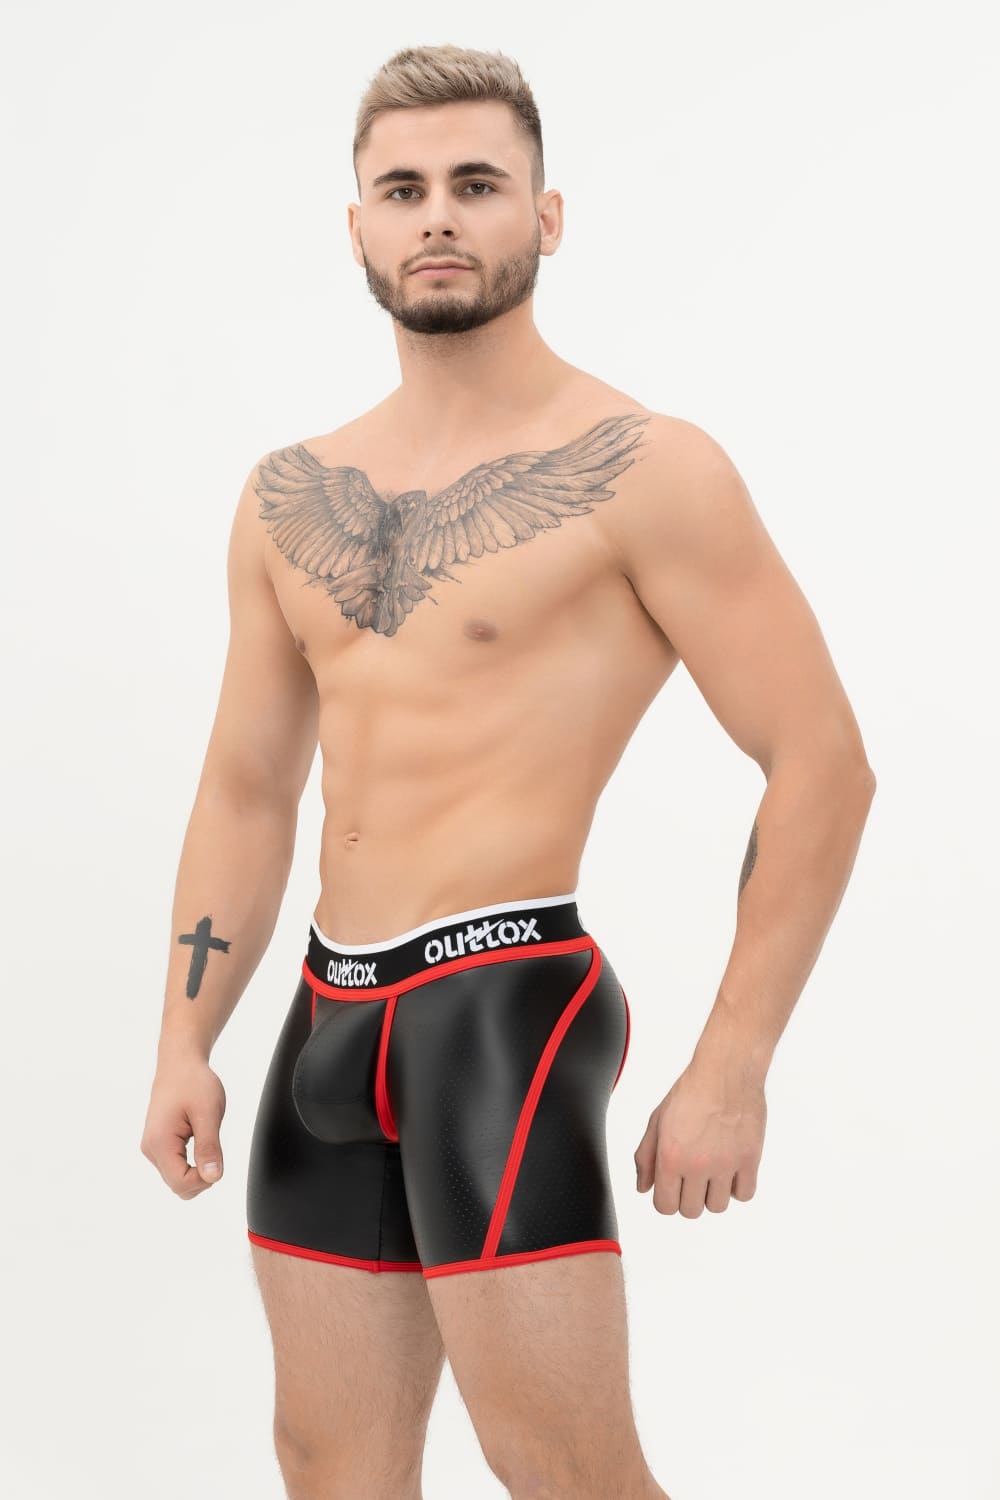 Outtox. Open Rear Shorts with Snap Codpiece. Black+Red